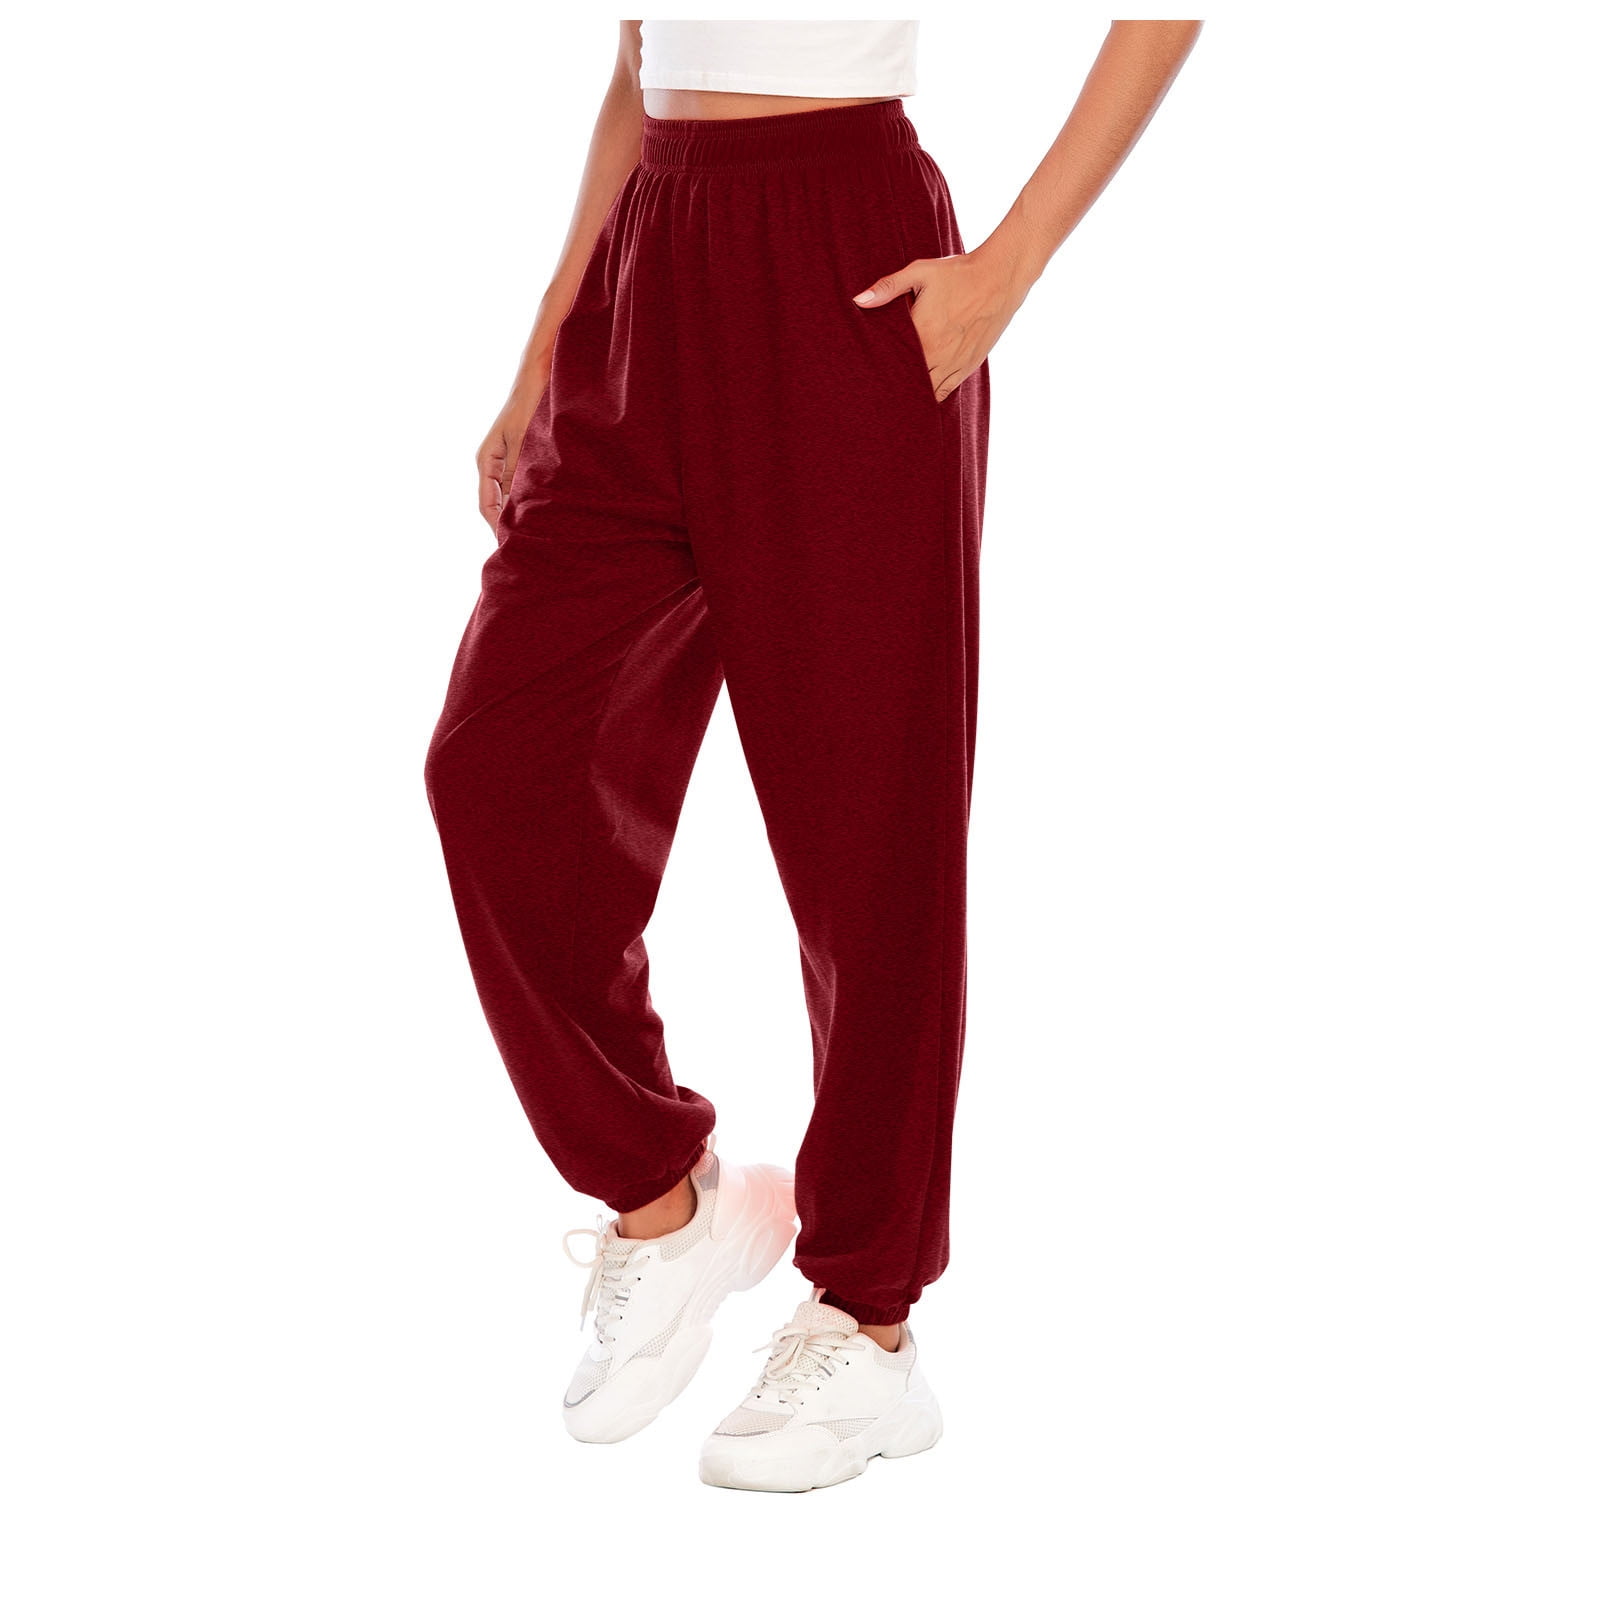 Giftesty Pants for Women Clearance Women Sports Pants Trousers Jogging ...